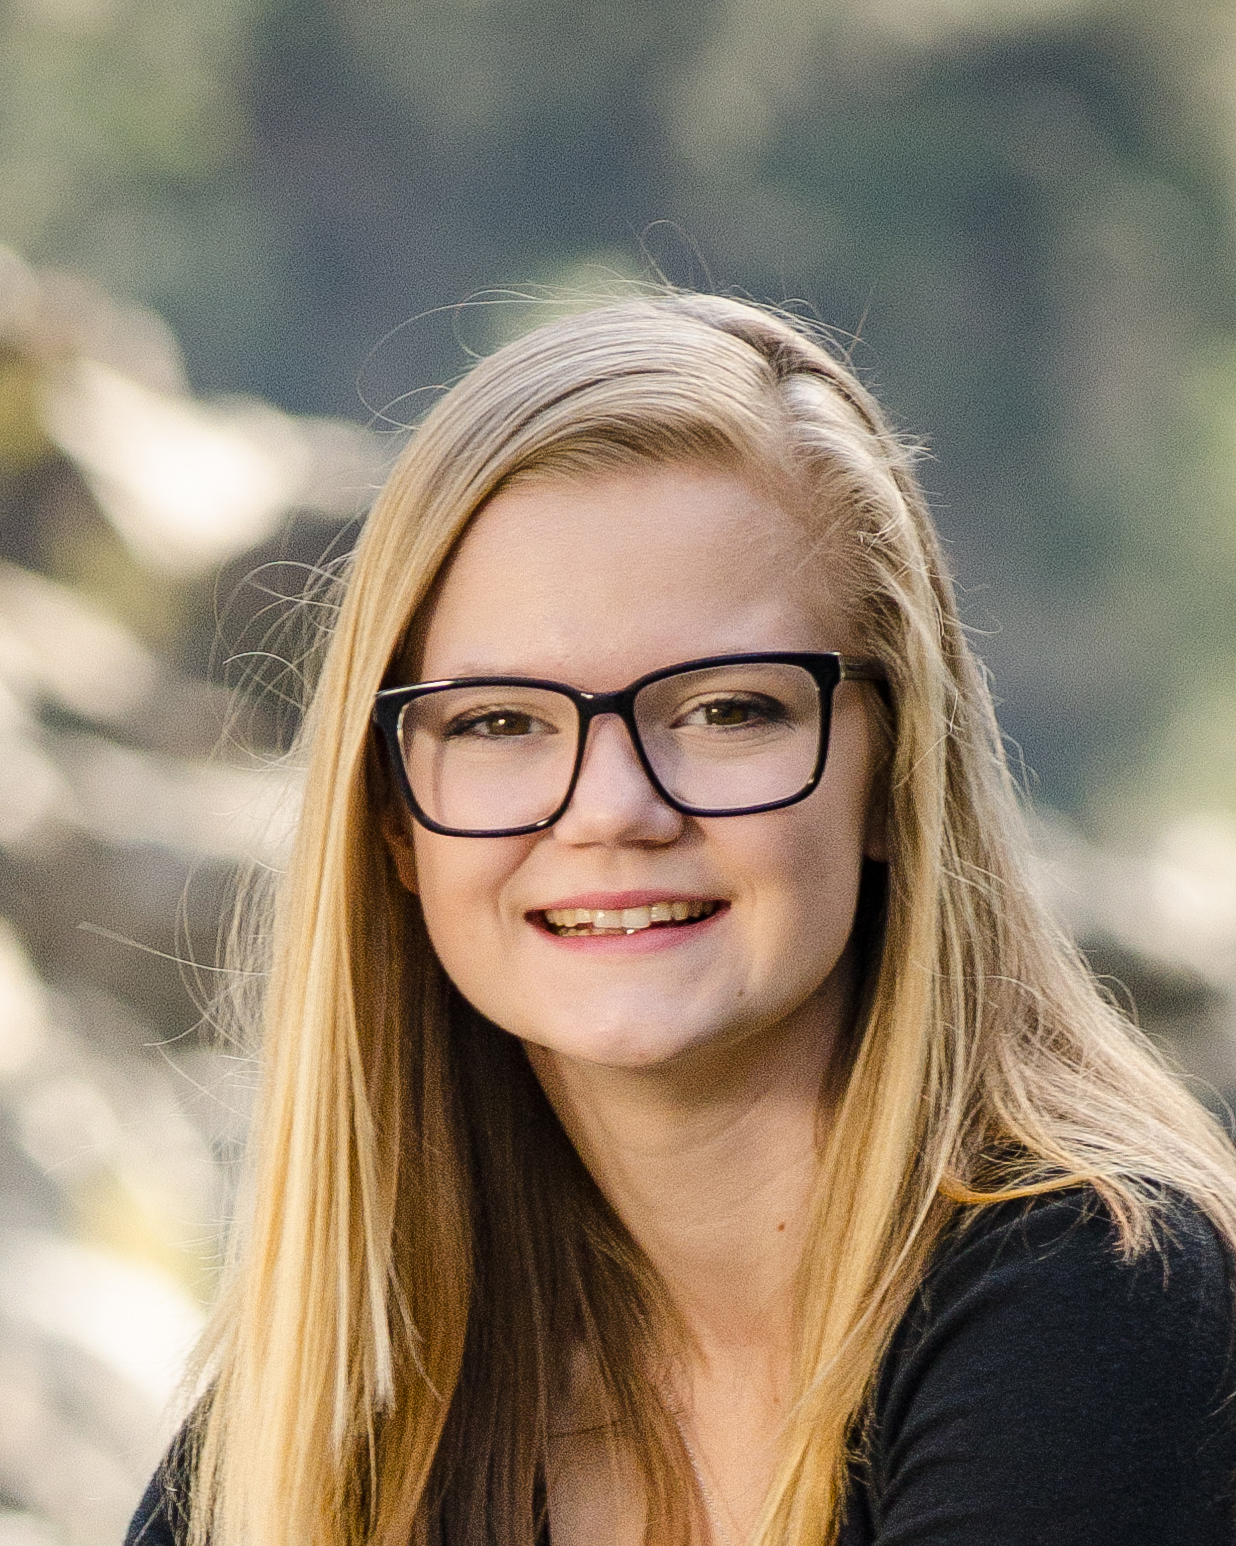 Savanna Turner, a Sierra College engineering student, was named a University Innovation Fellow and is one of 229 international students participating in the Stanford University school program.